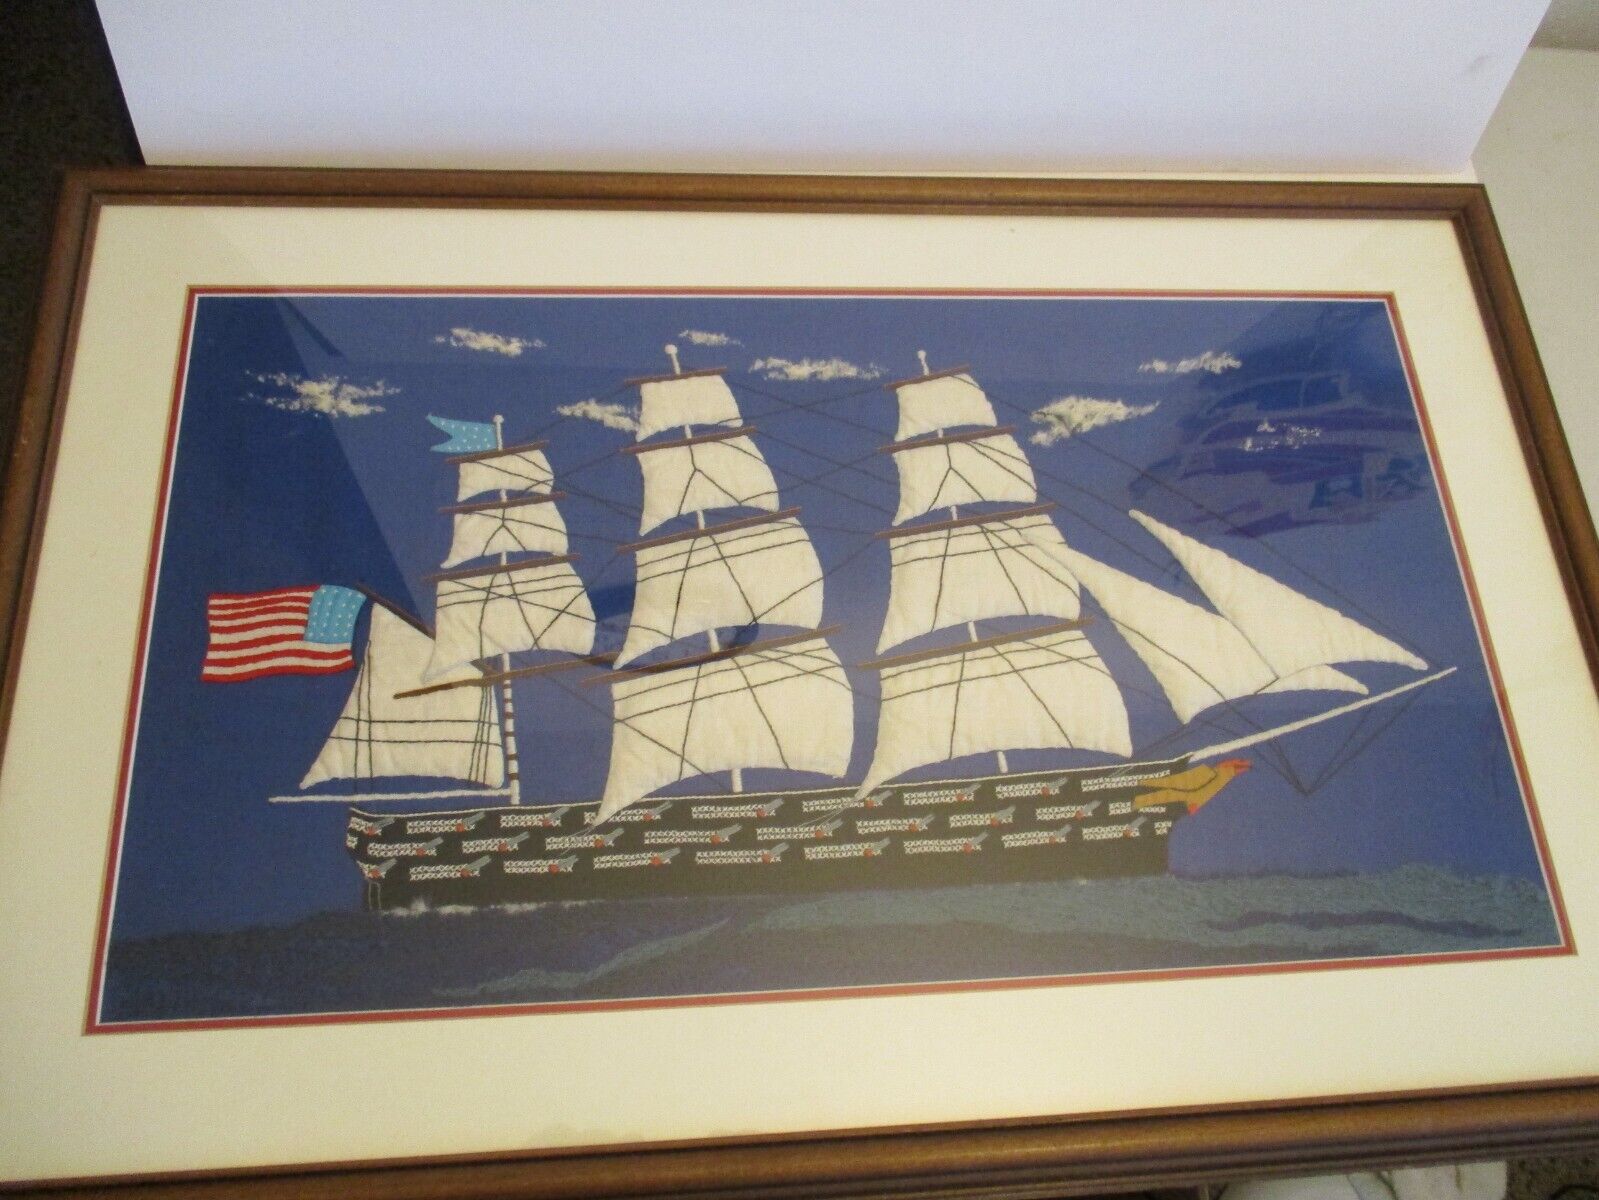 Cross Stitch Of An Early American 3 Masted Frigate Warship Nicely Matted/Framed